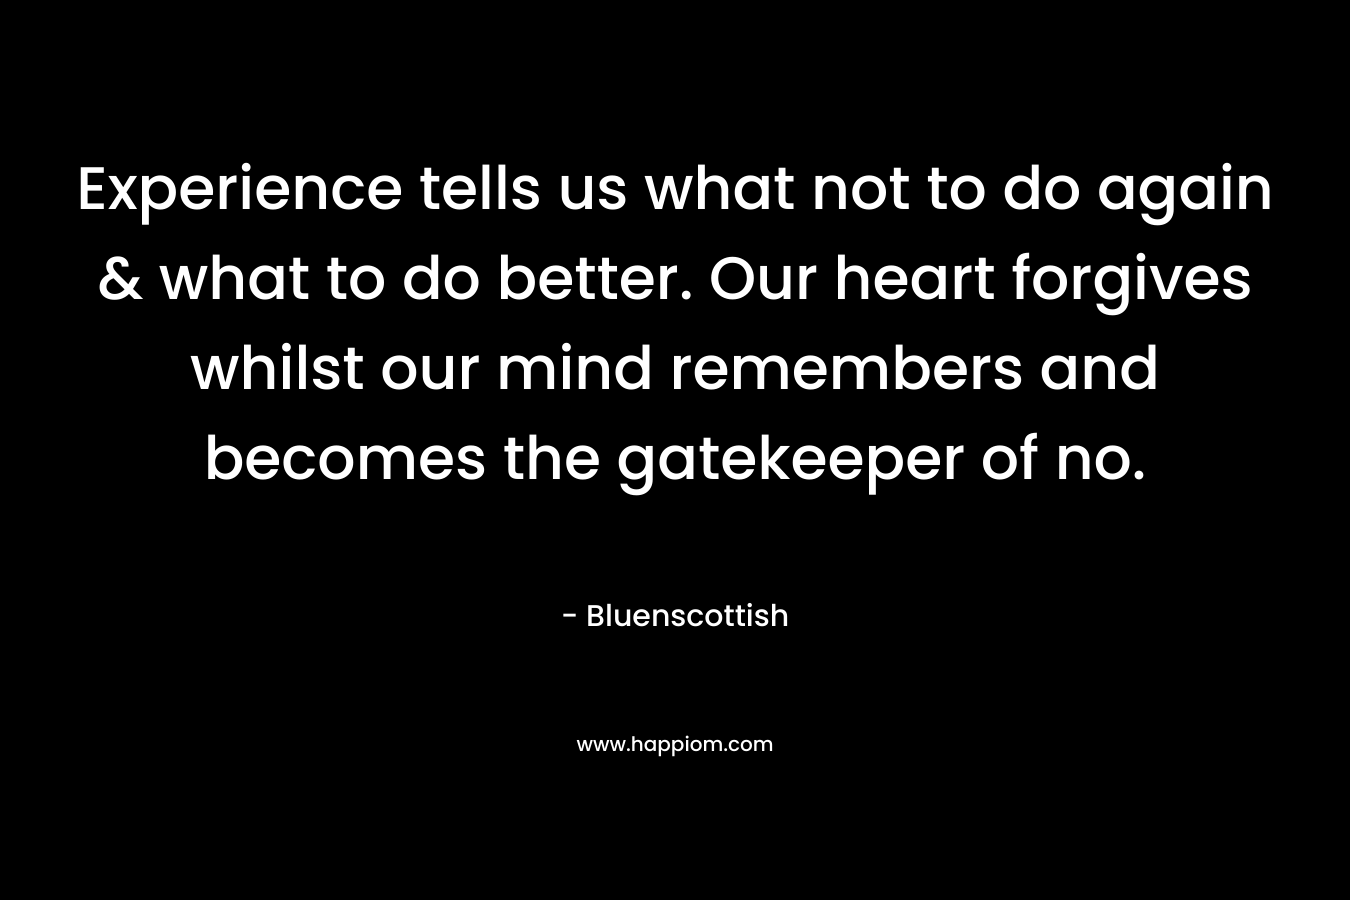 Experience tells us what not to do again & what to do better. Our heart forgives whilst our mind remembers and becomes the gatekeeper of no. – Bluenscottish